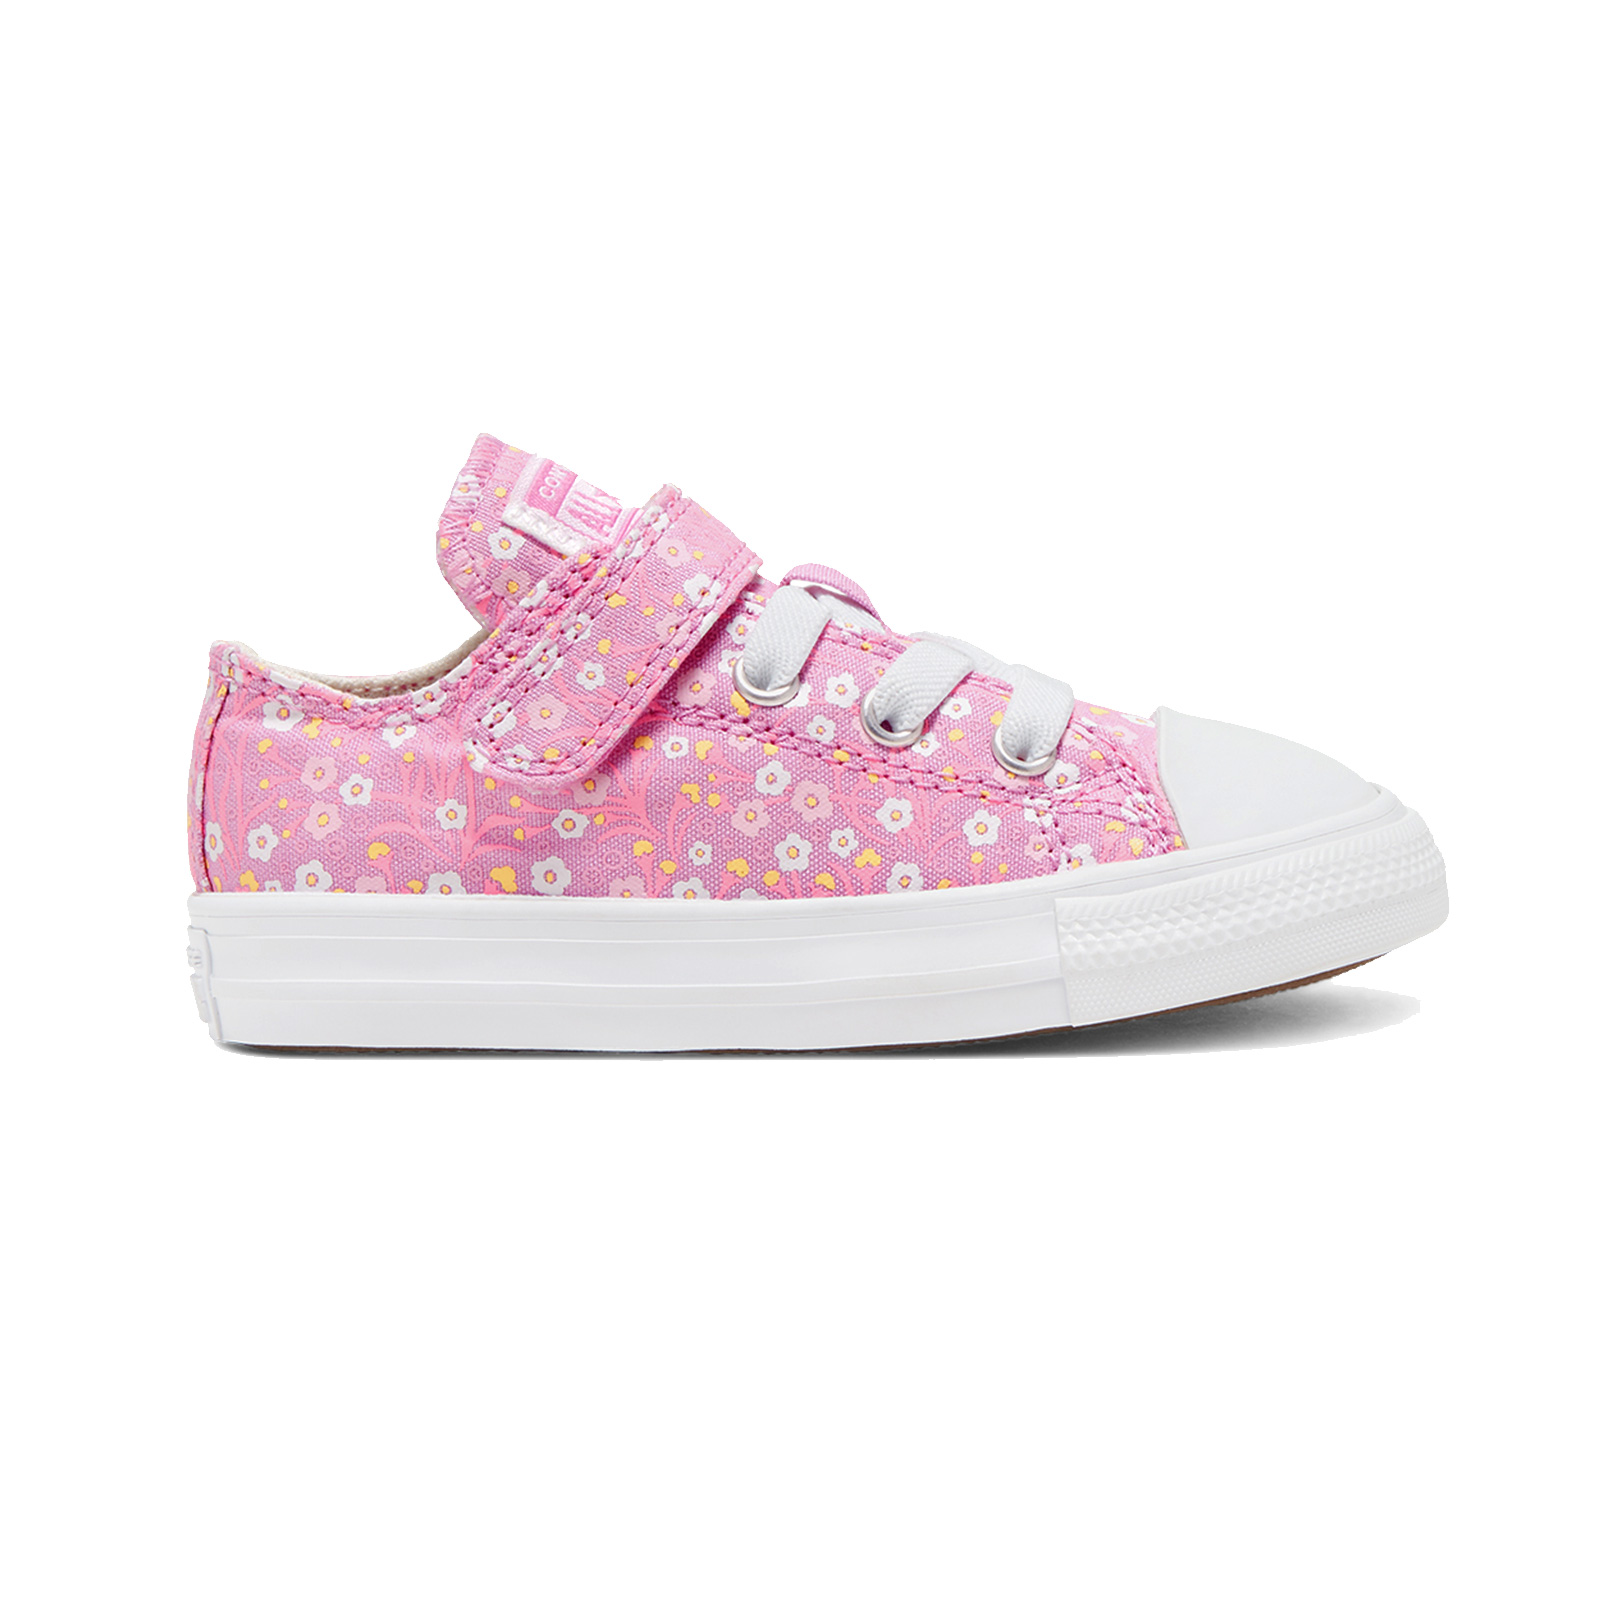 Converse - CHUCK TAYLOR ALL STAR 1V FLORAL - 640-PEONY PINK/TOPAZ GOLD/WHITE Παιδικά > Παπούτσια > Sneaker > Παπούτσι Mid Cut